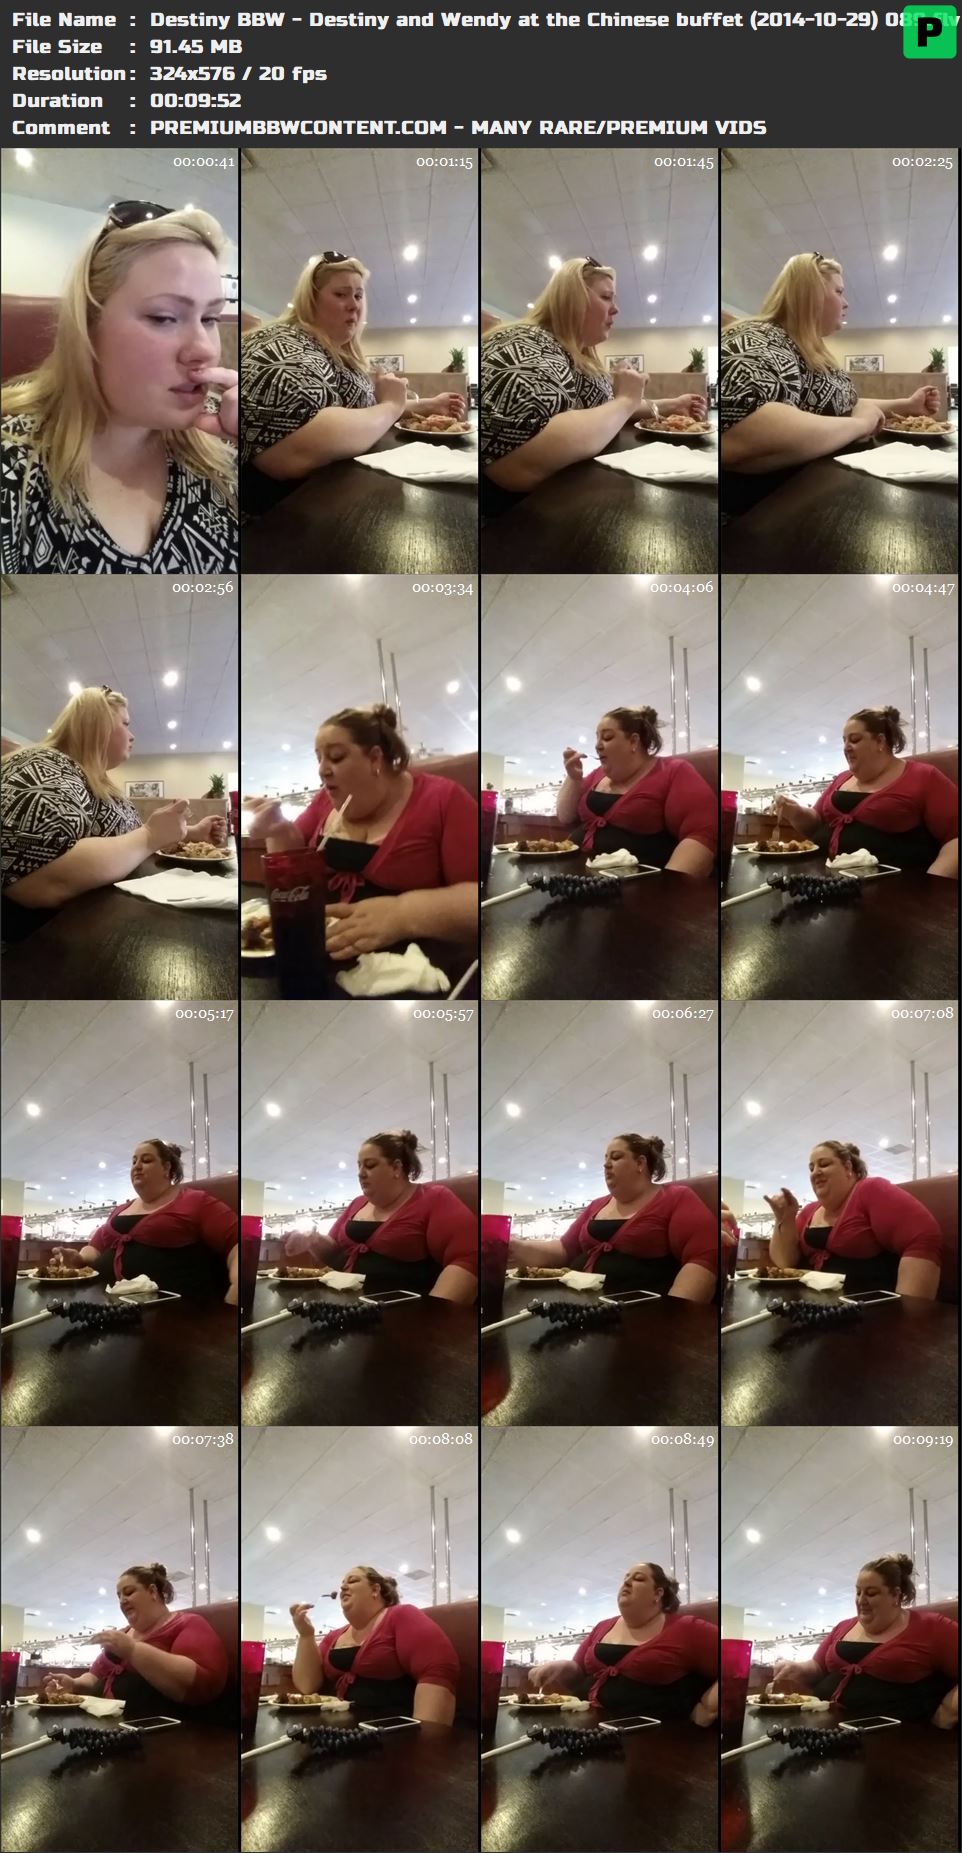 Destiny BBW - Destiny and Wendy at the Chinese buffet (2014-10-29) 089 thumbnails